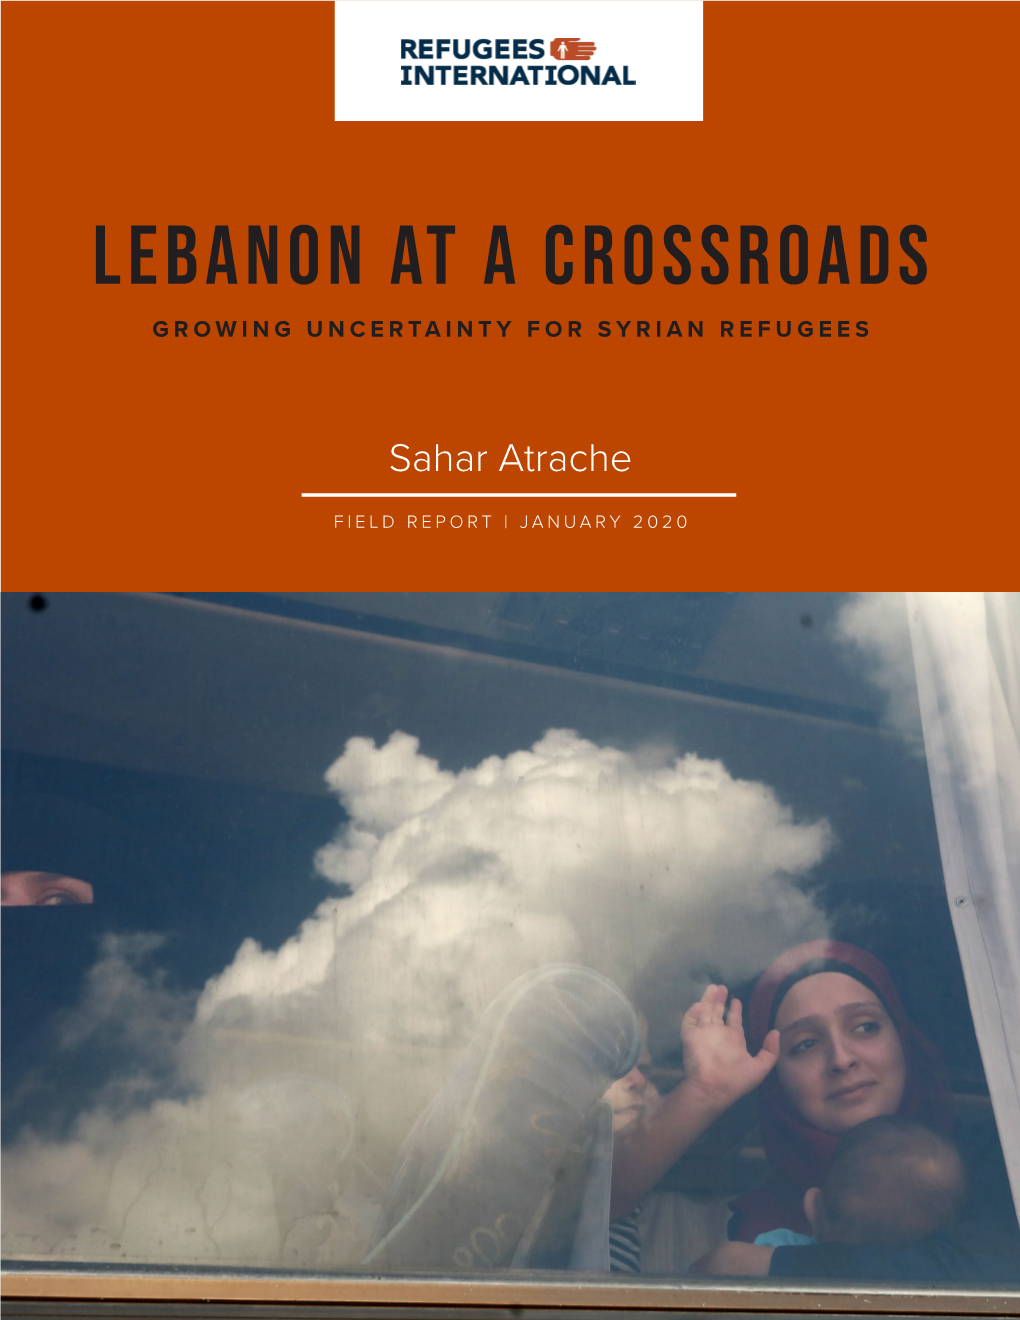 Lebanon at a Crossroads GROWING UNCERTAINTY for SYRIAN REFUGEES